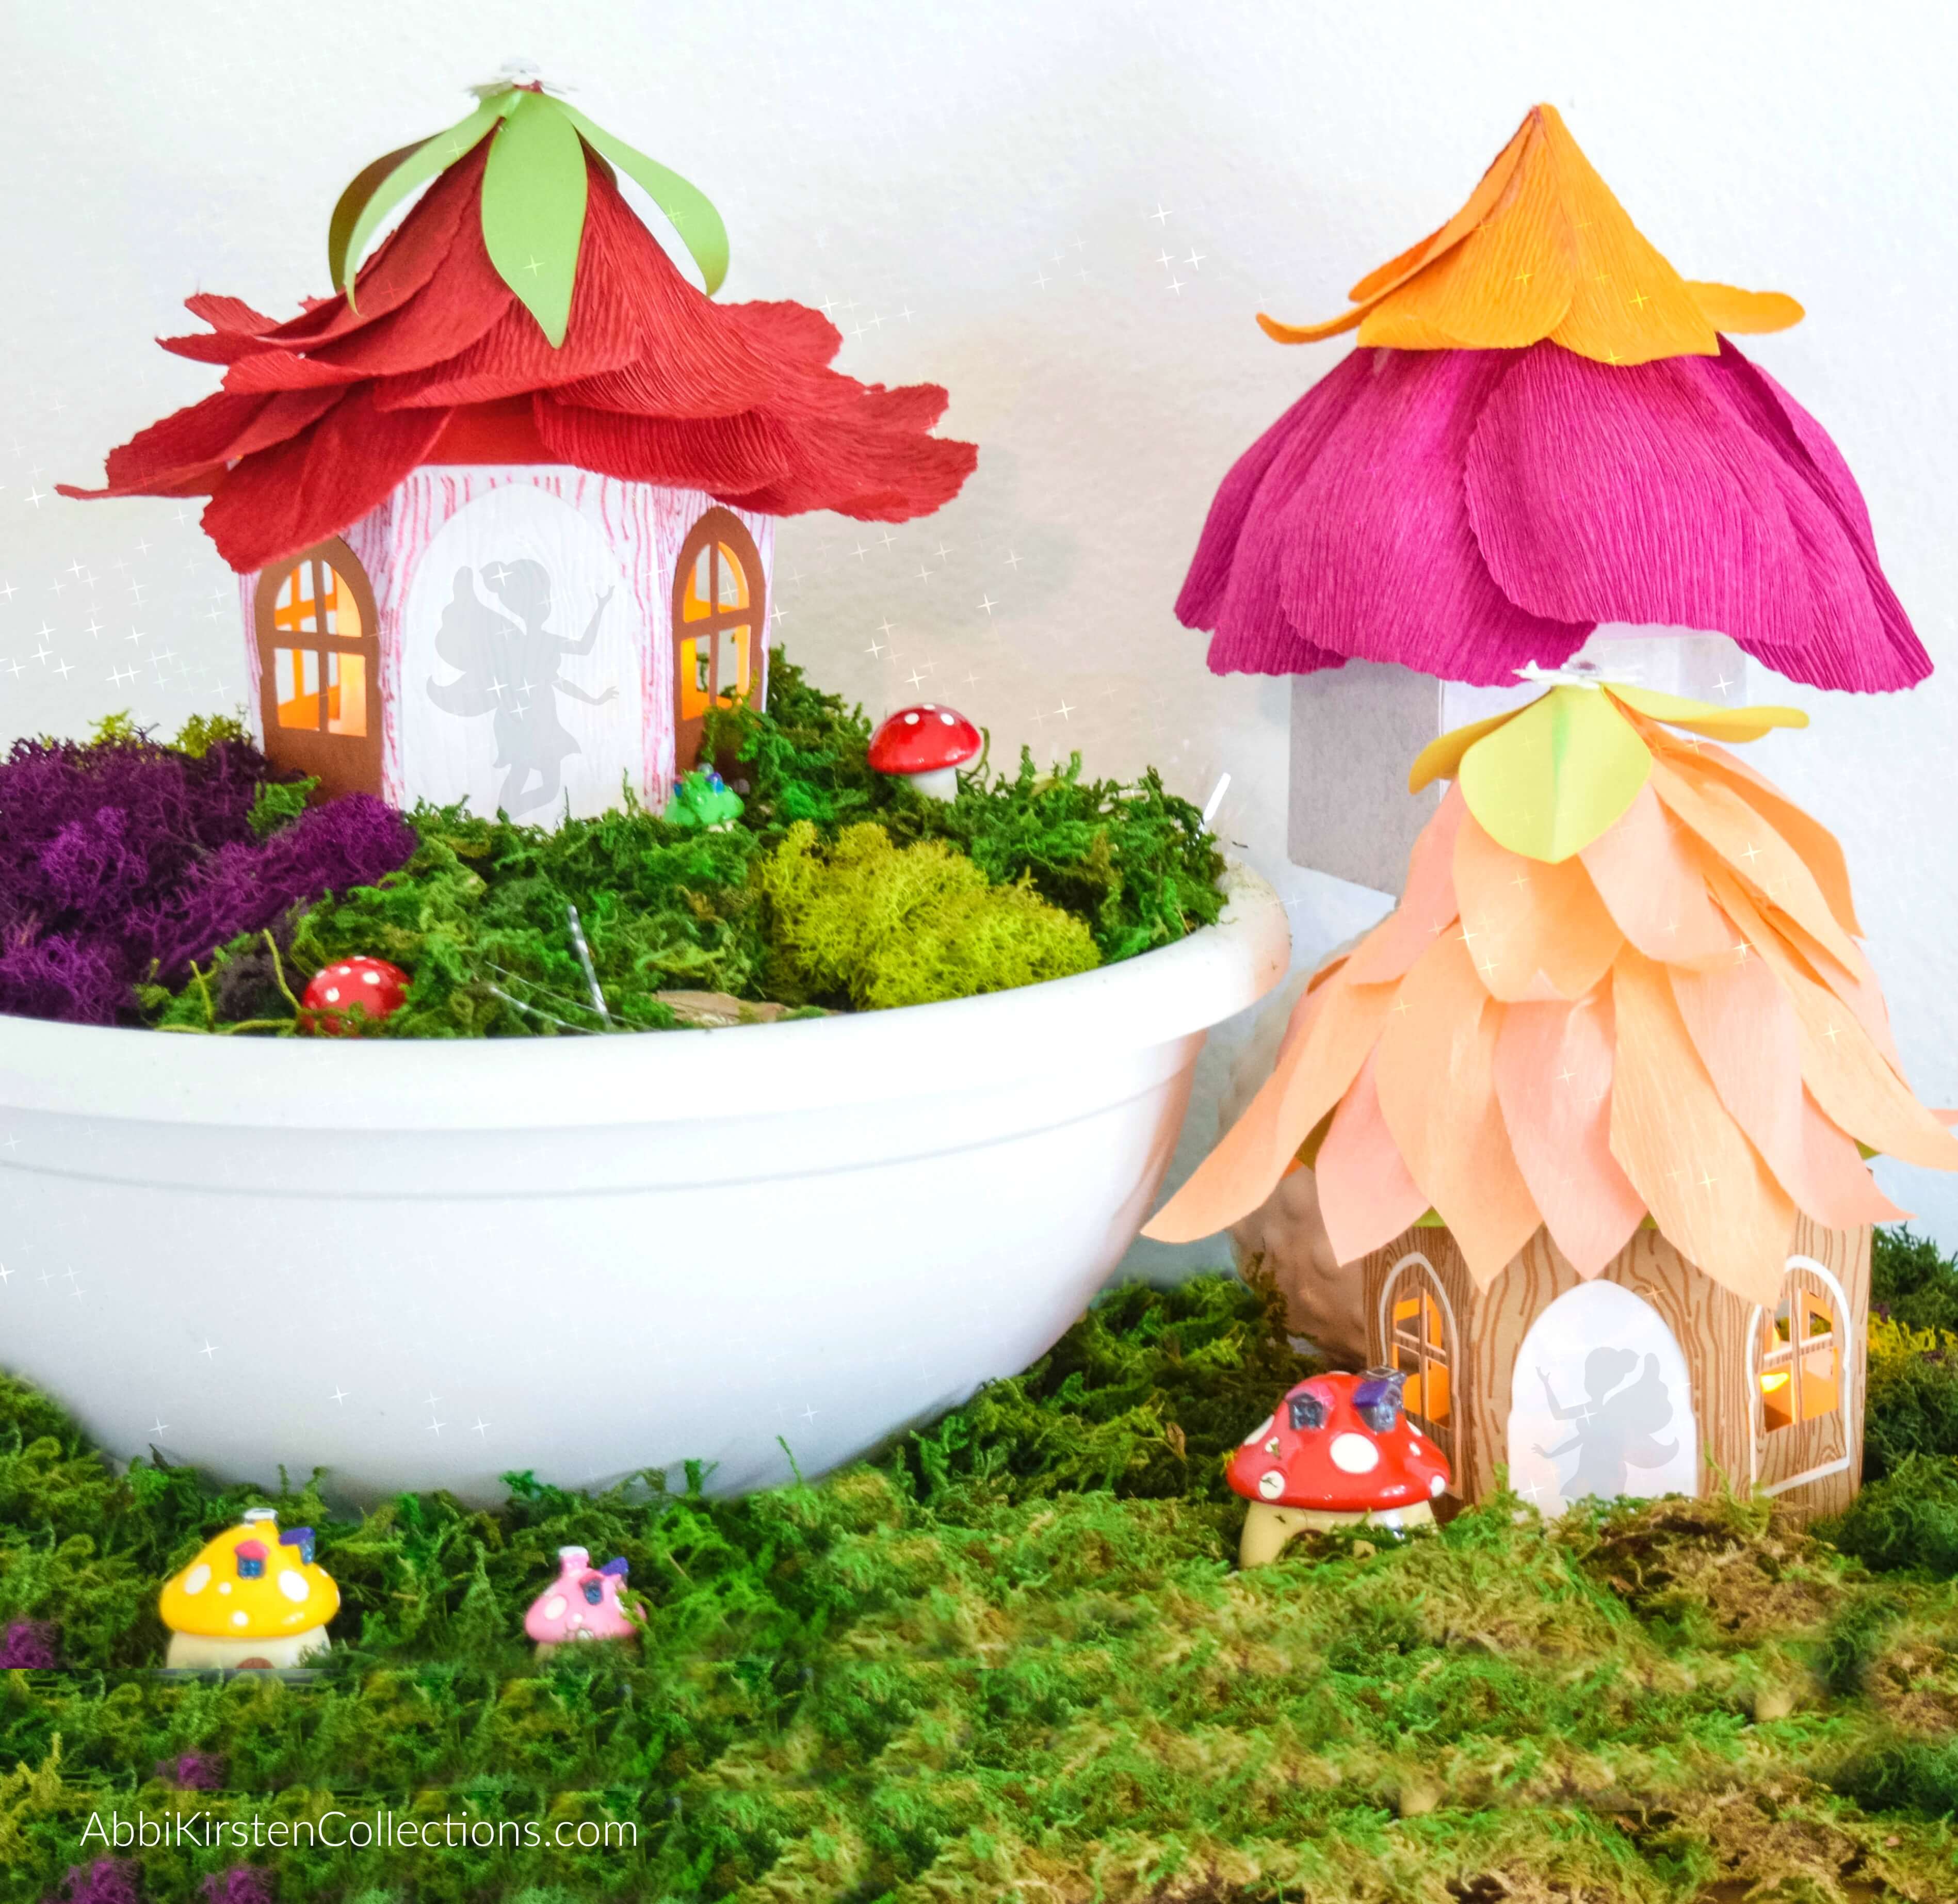 Three paper fairy homes sit in faux moss and a white bowl. The roofs are made of crepe paper to resemble upside-down flowers. The silhouette of a fairy is seen in each door, and small mushrooms adorn the greenery. You can learn how to make these cute houses at AbbiKirstenCollections.com. 